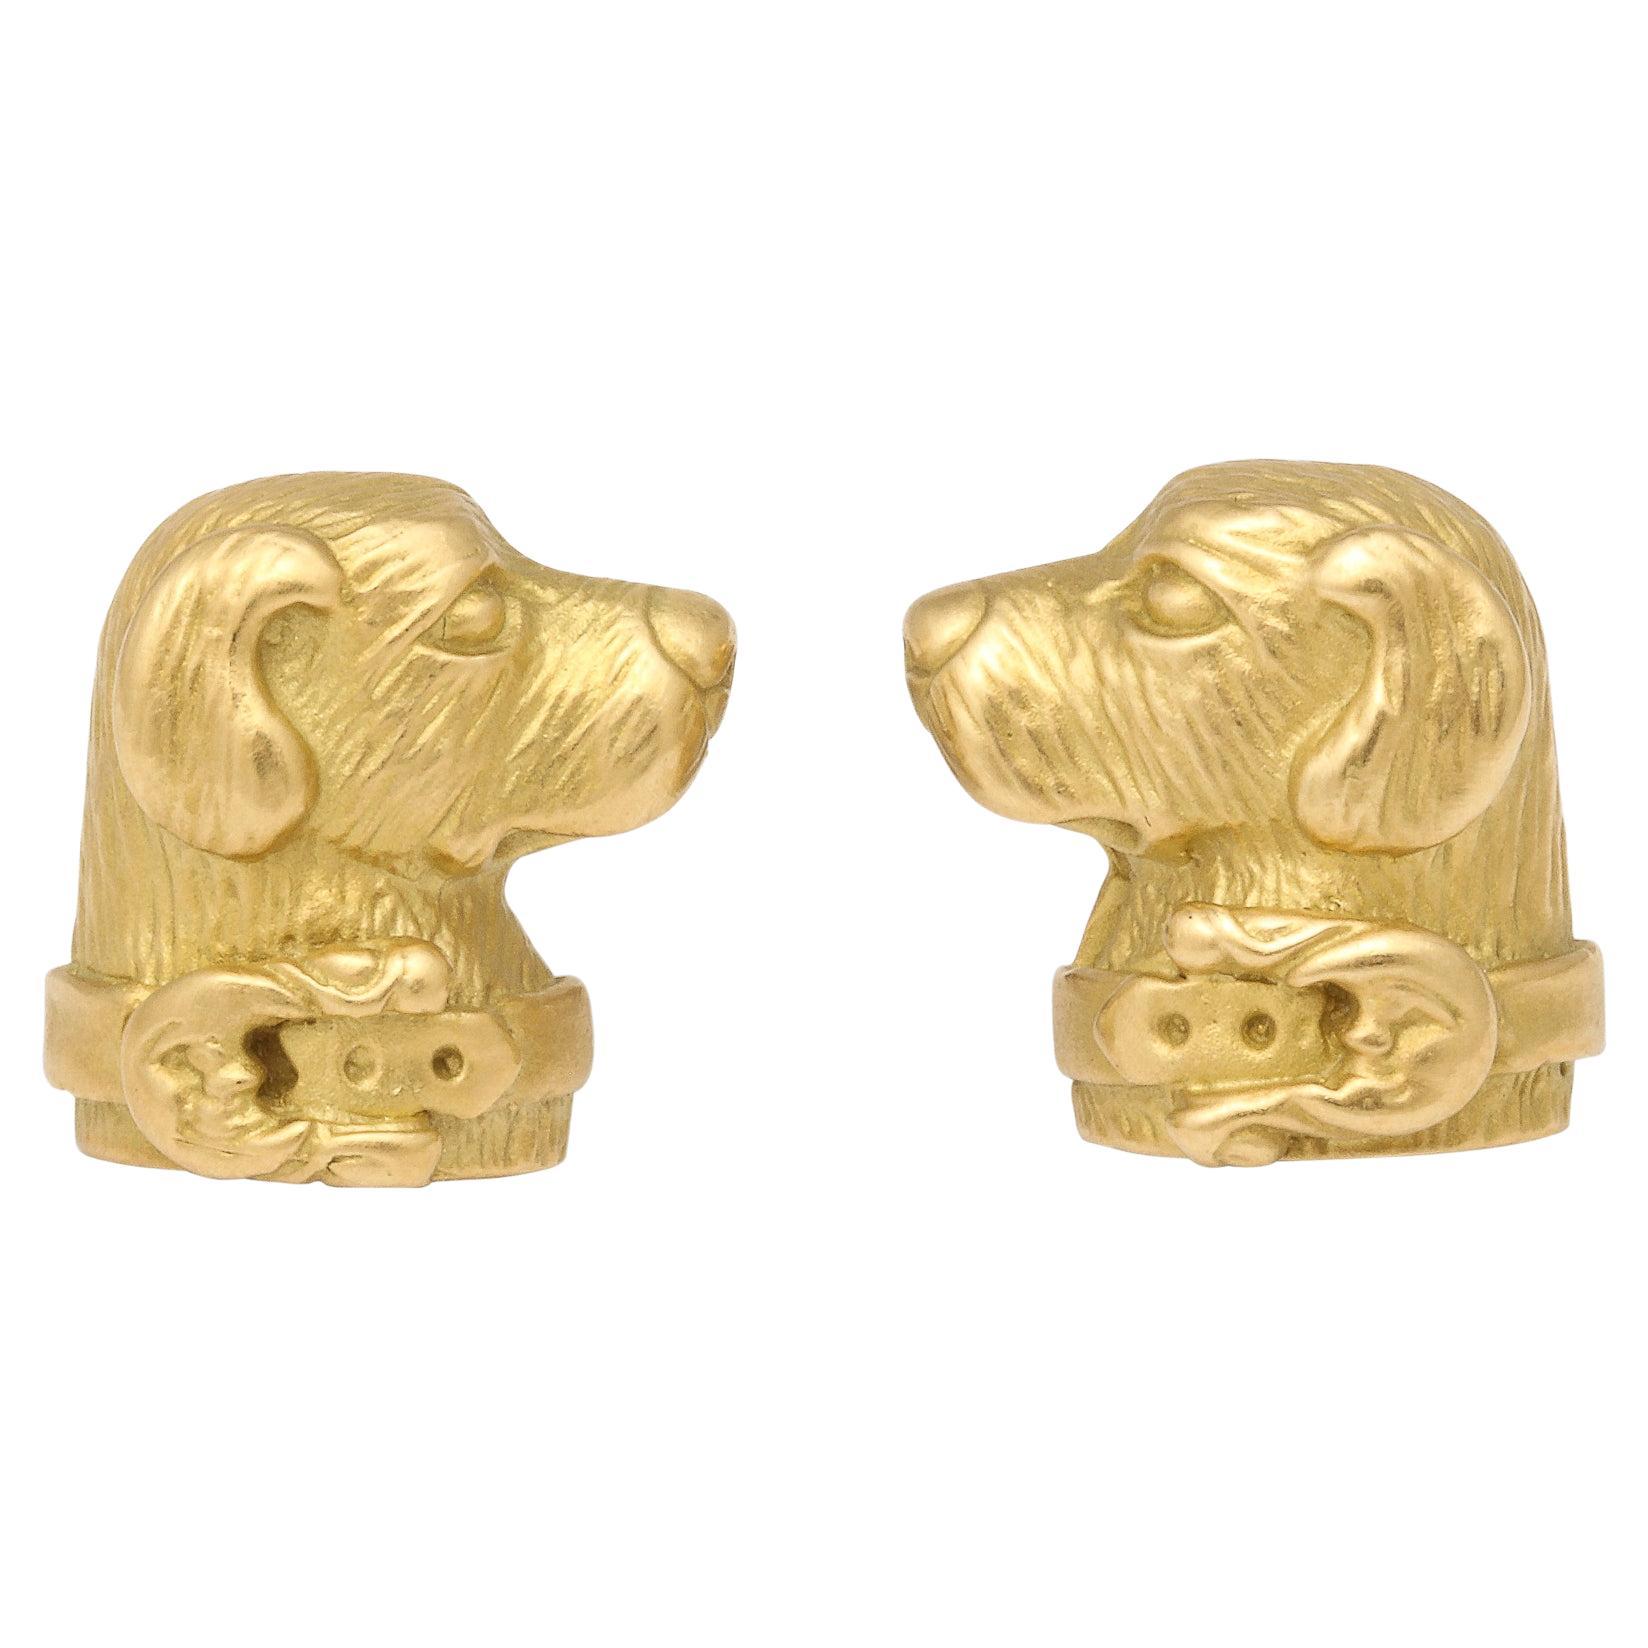 Modernist Cufflinks with Golden Retriever Canine Motif in 14 Carat Yellow Gold For Sale